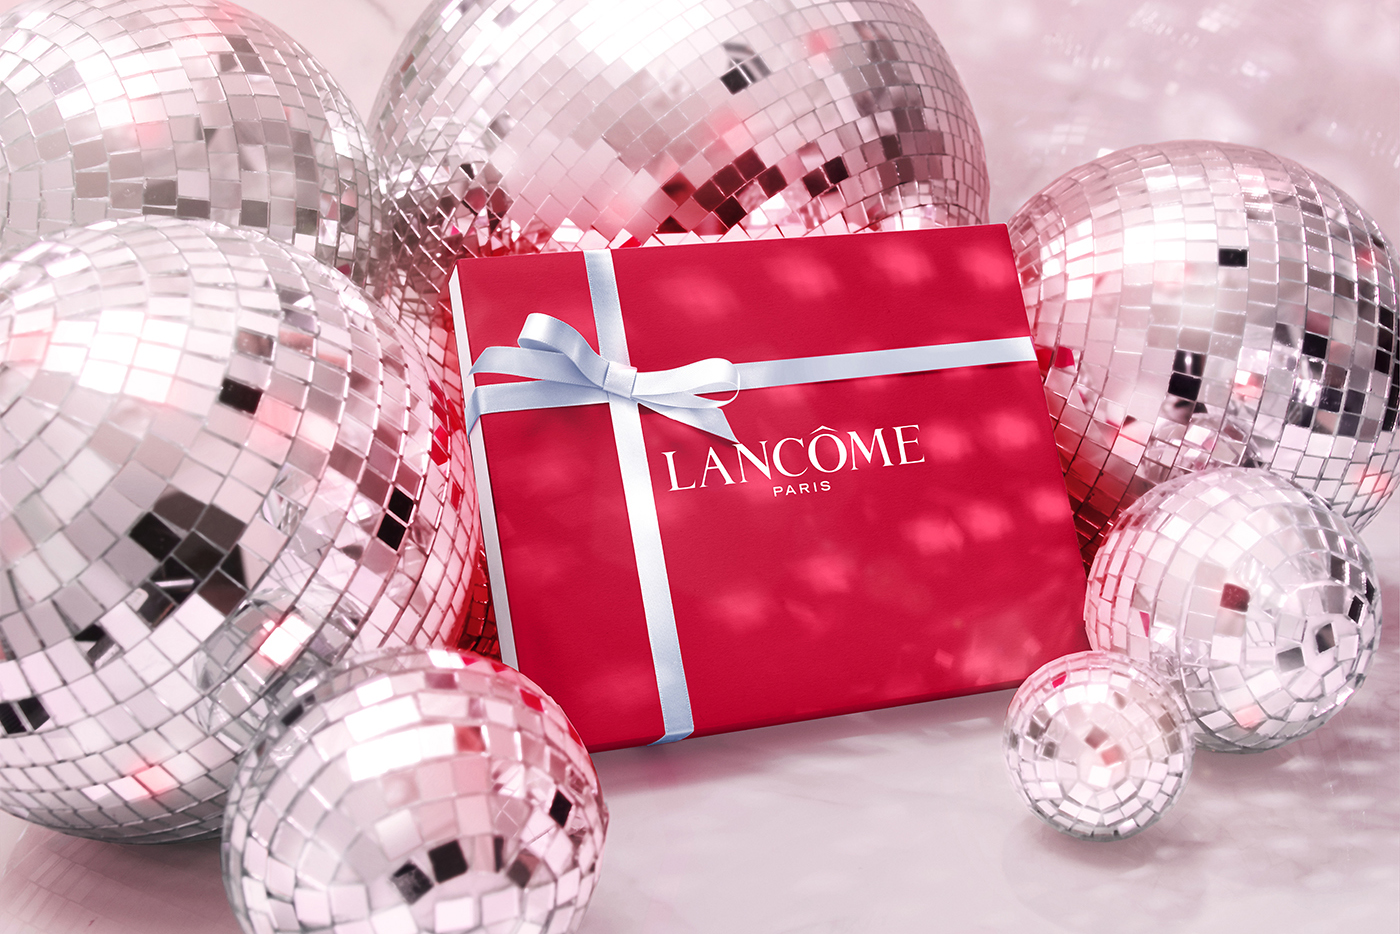 Lancome Moving Images